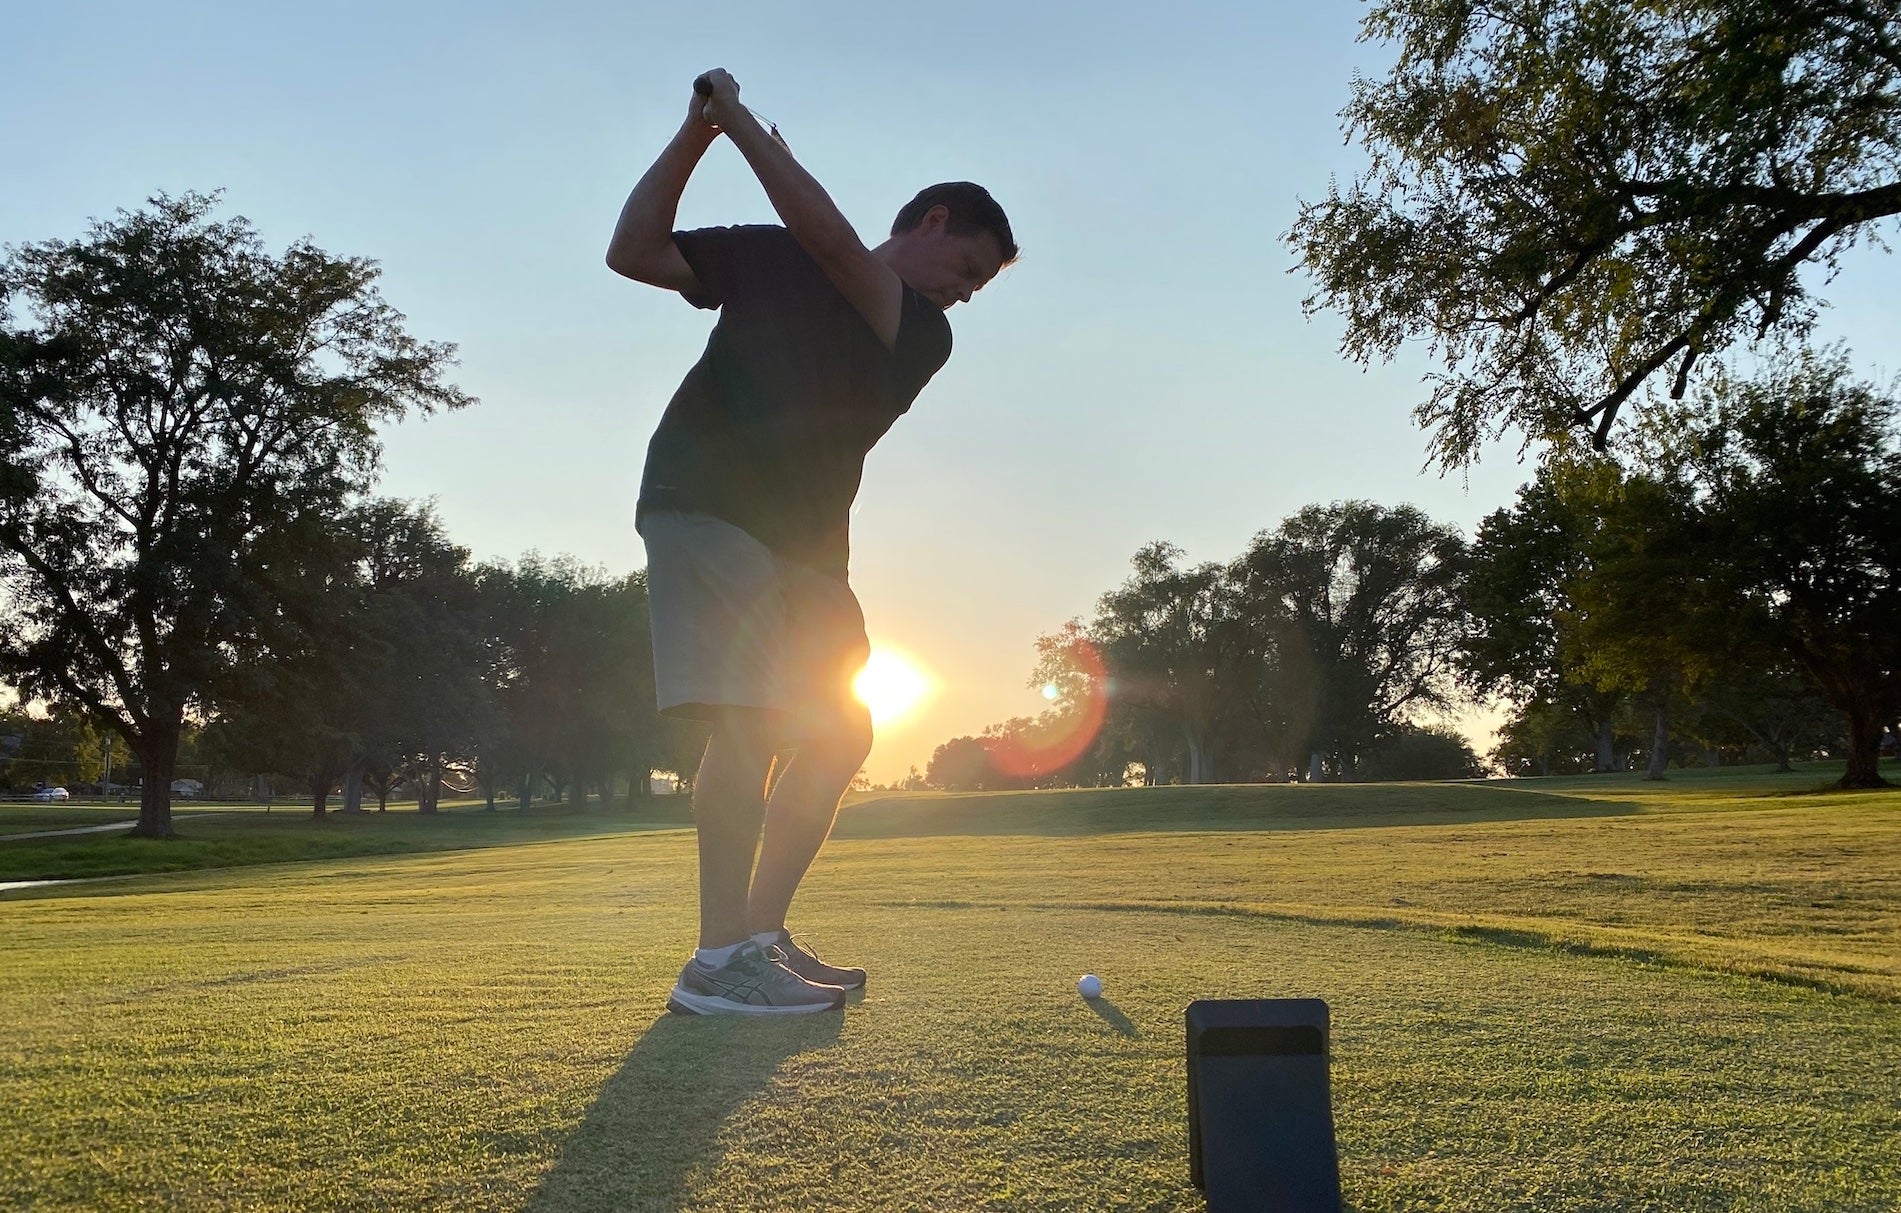 Golf reviewer Marc swinging at sunset on the golf range with the Swing Caddie SC4 behind him